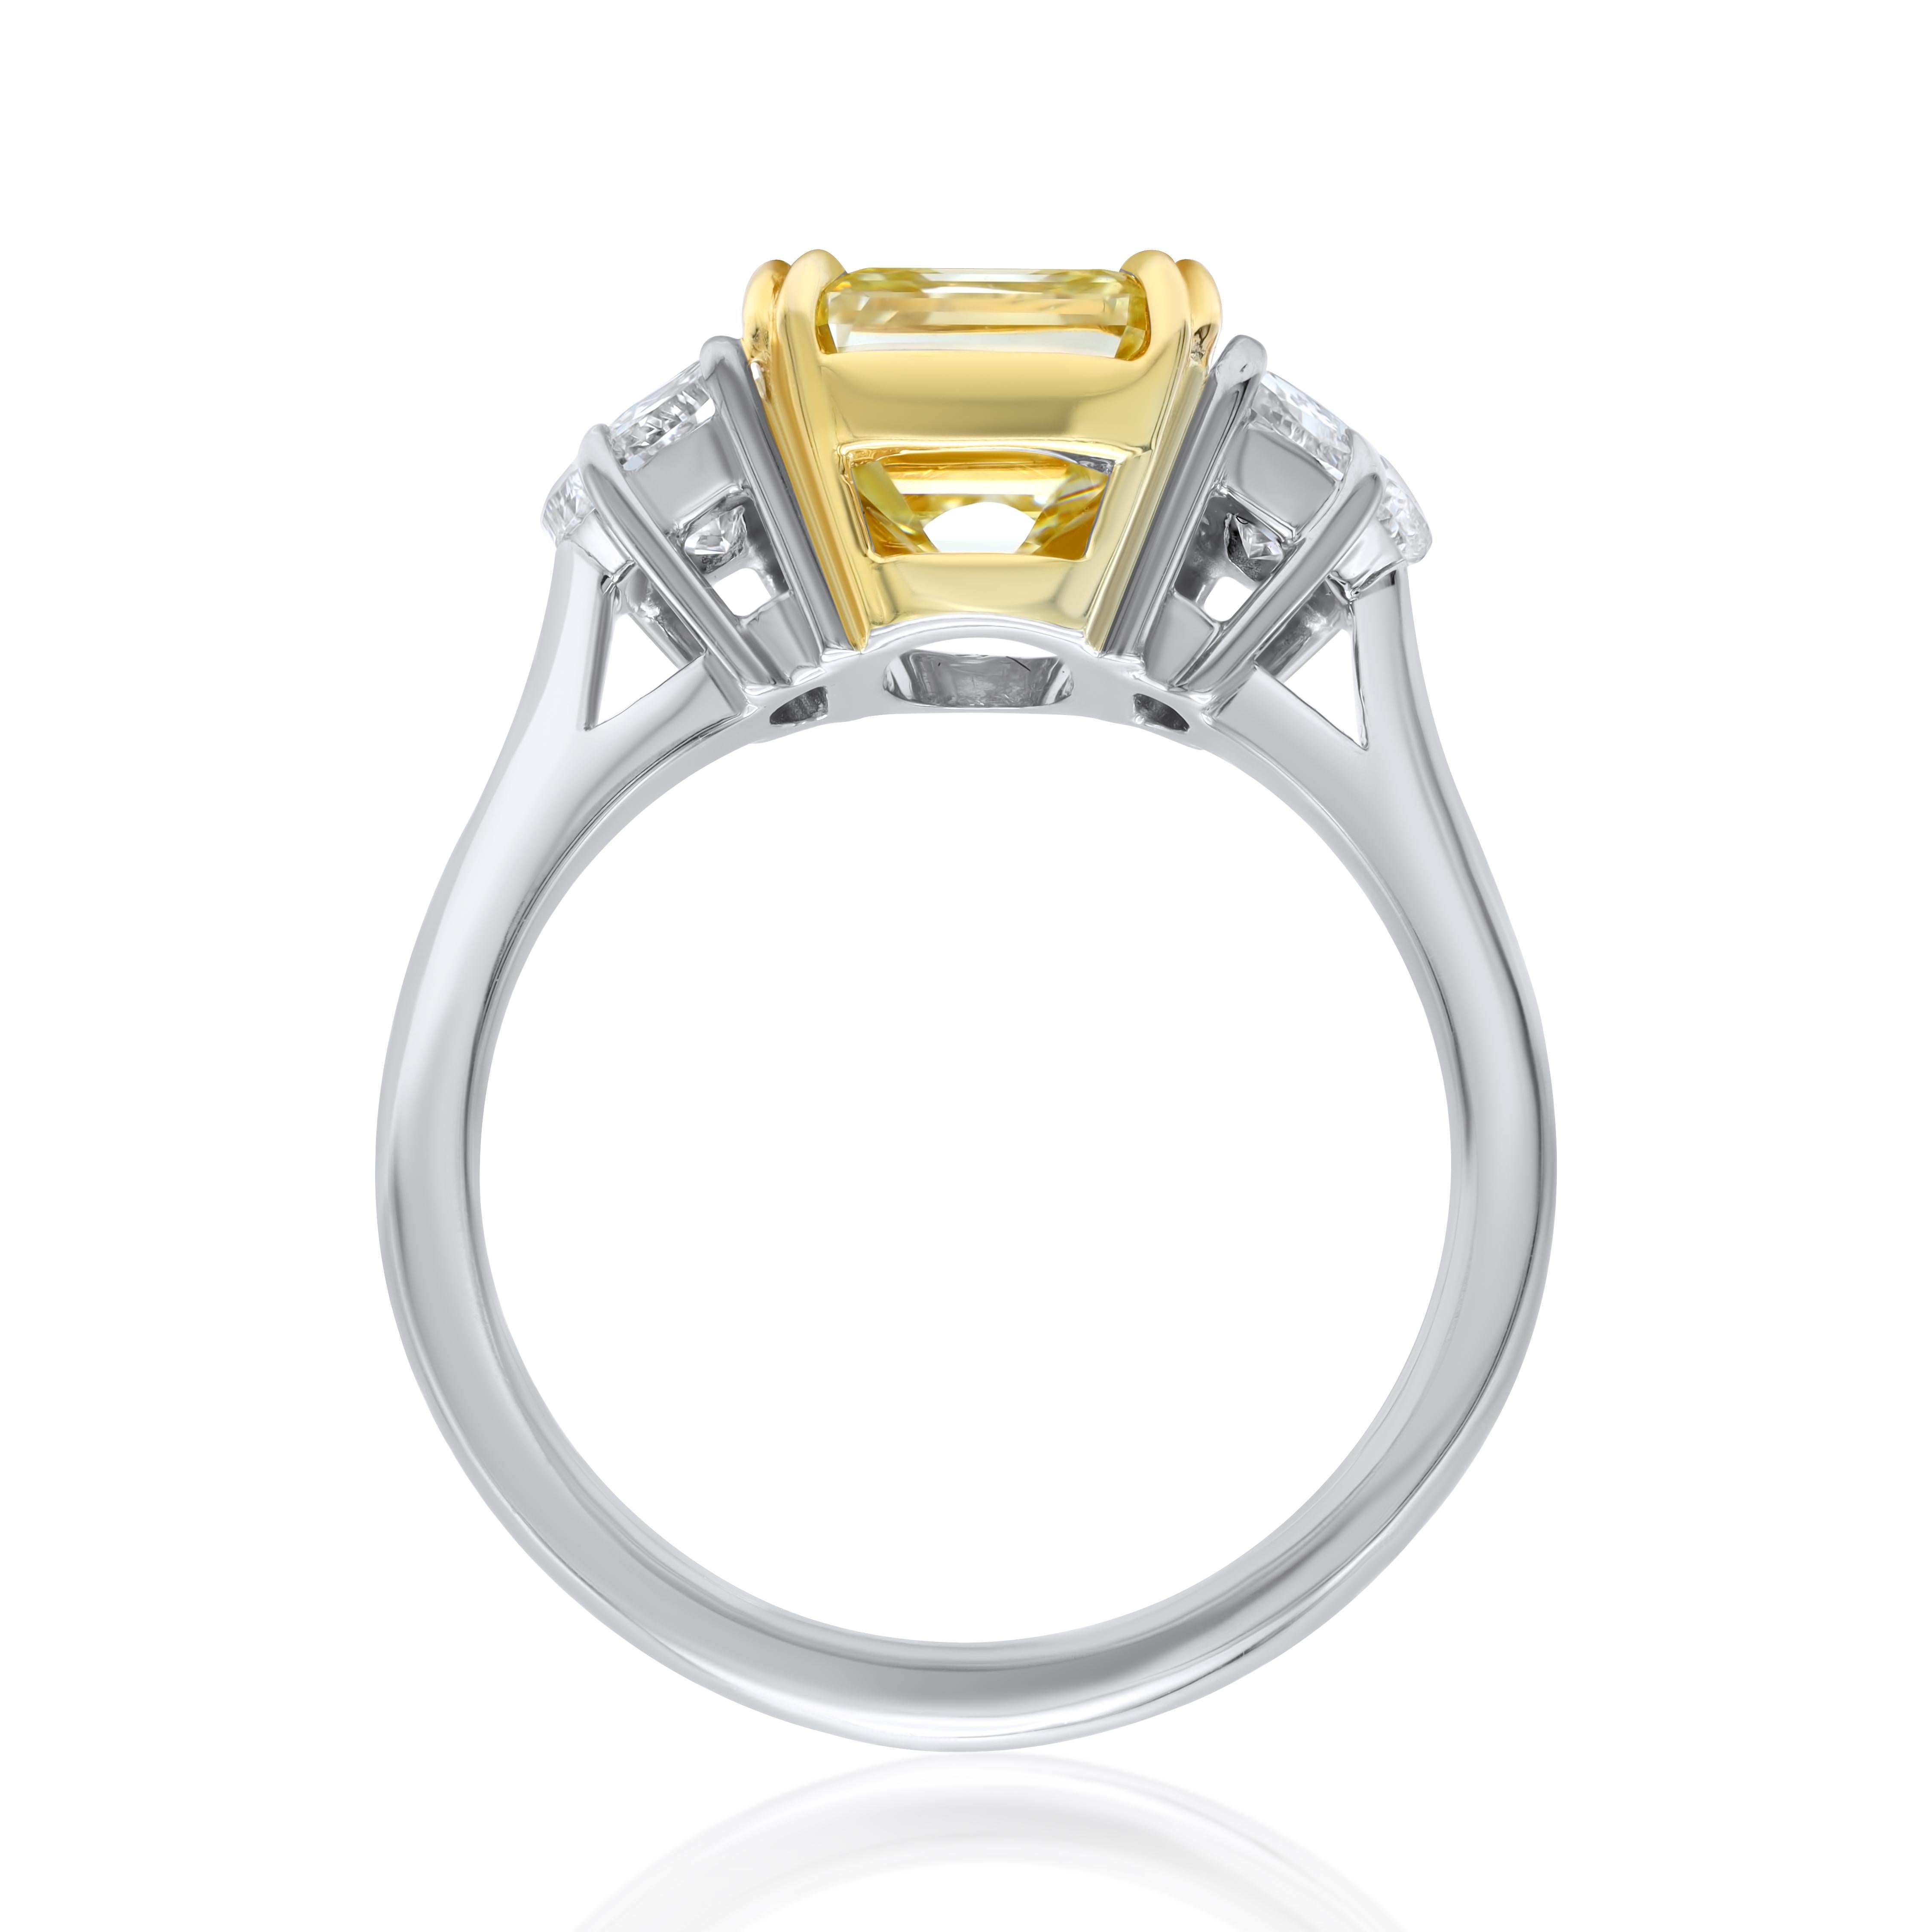 Modern Diana M. Platinum and 18 kt yellow gold engagement ring  3.03 FY VS2 EM CUT  For Sale